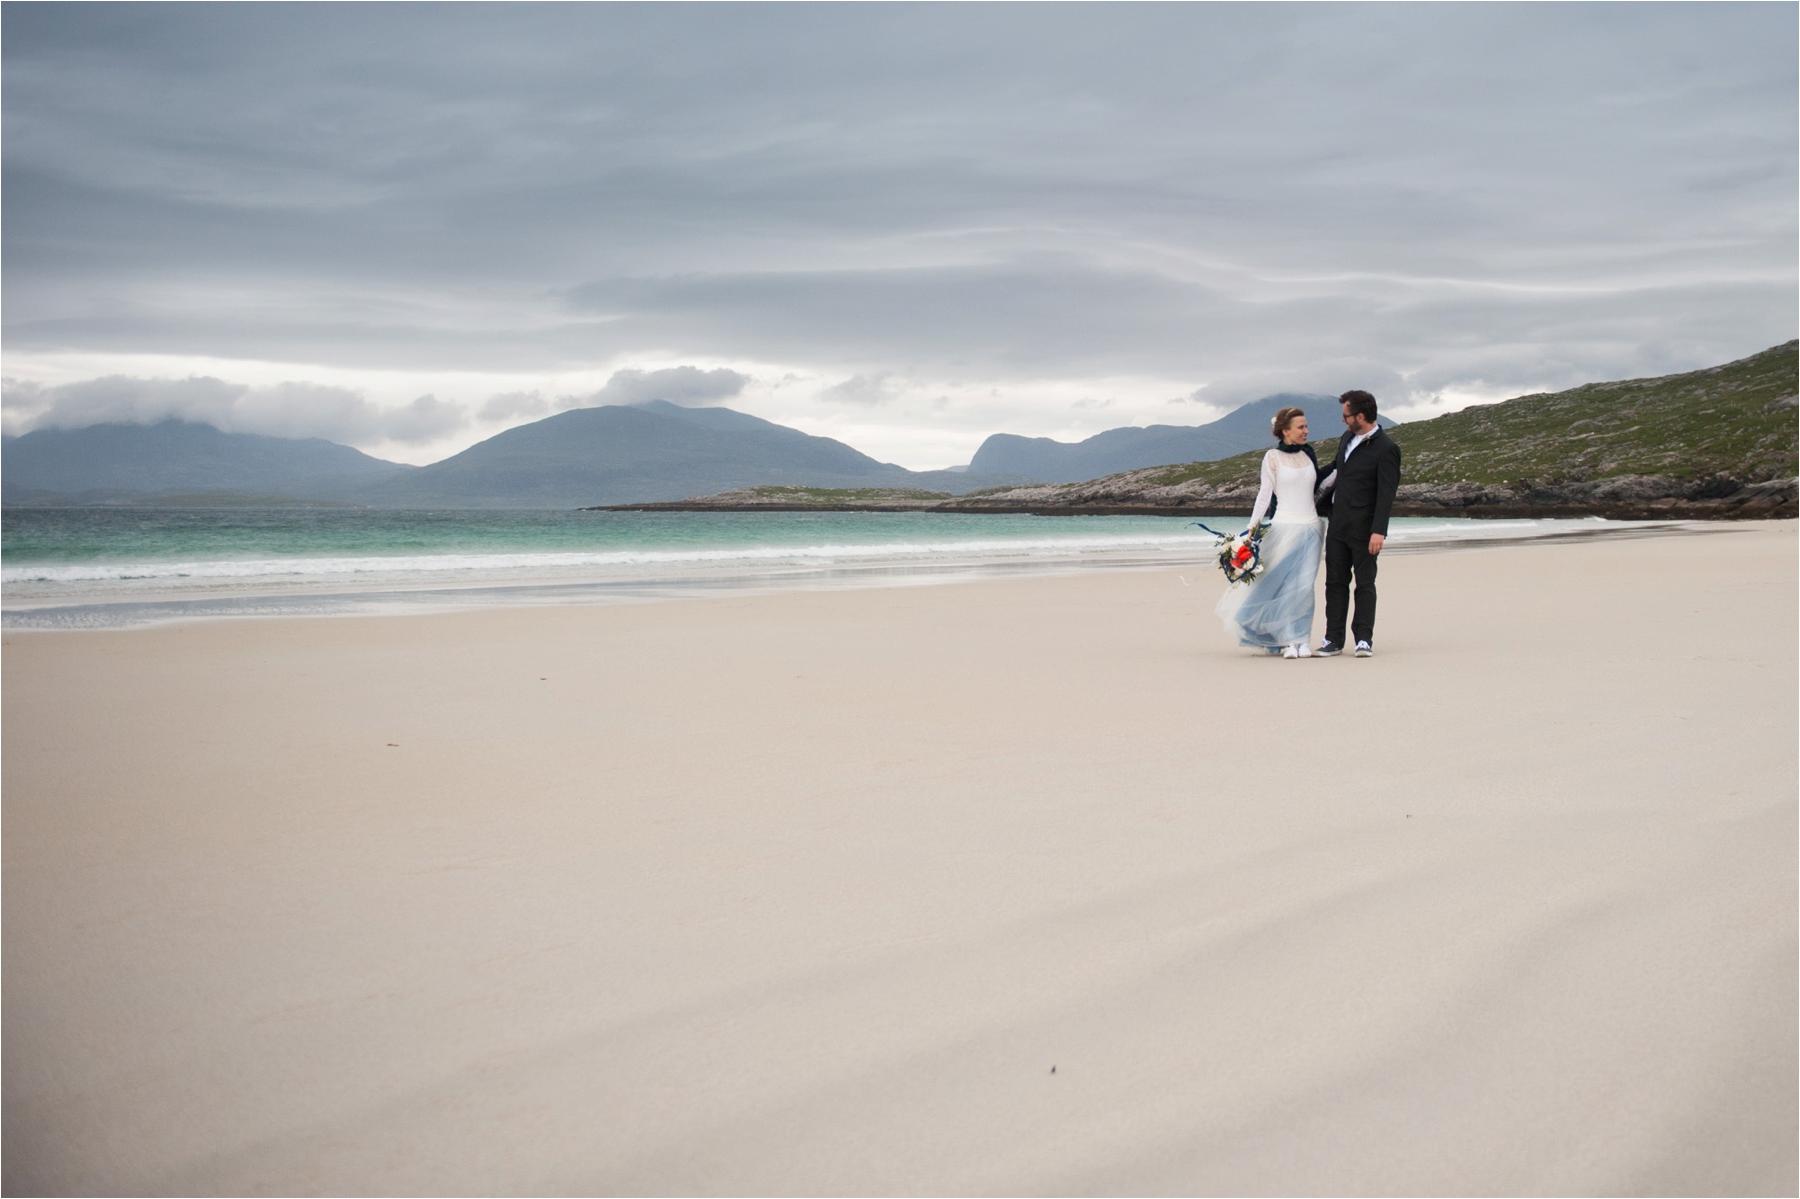 Outdoor wedding photography in the Outer Hebrides. This couple is alone on Scarista Beach under storm skies, following their elopement. 